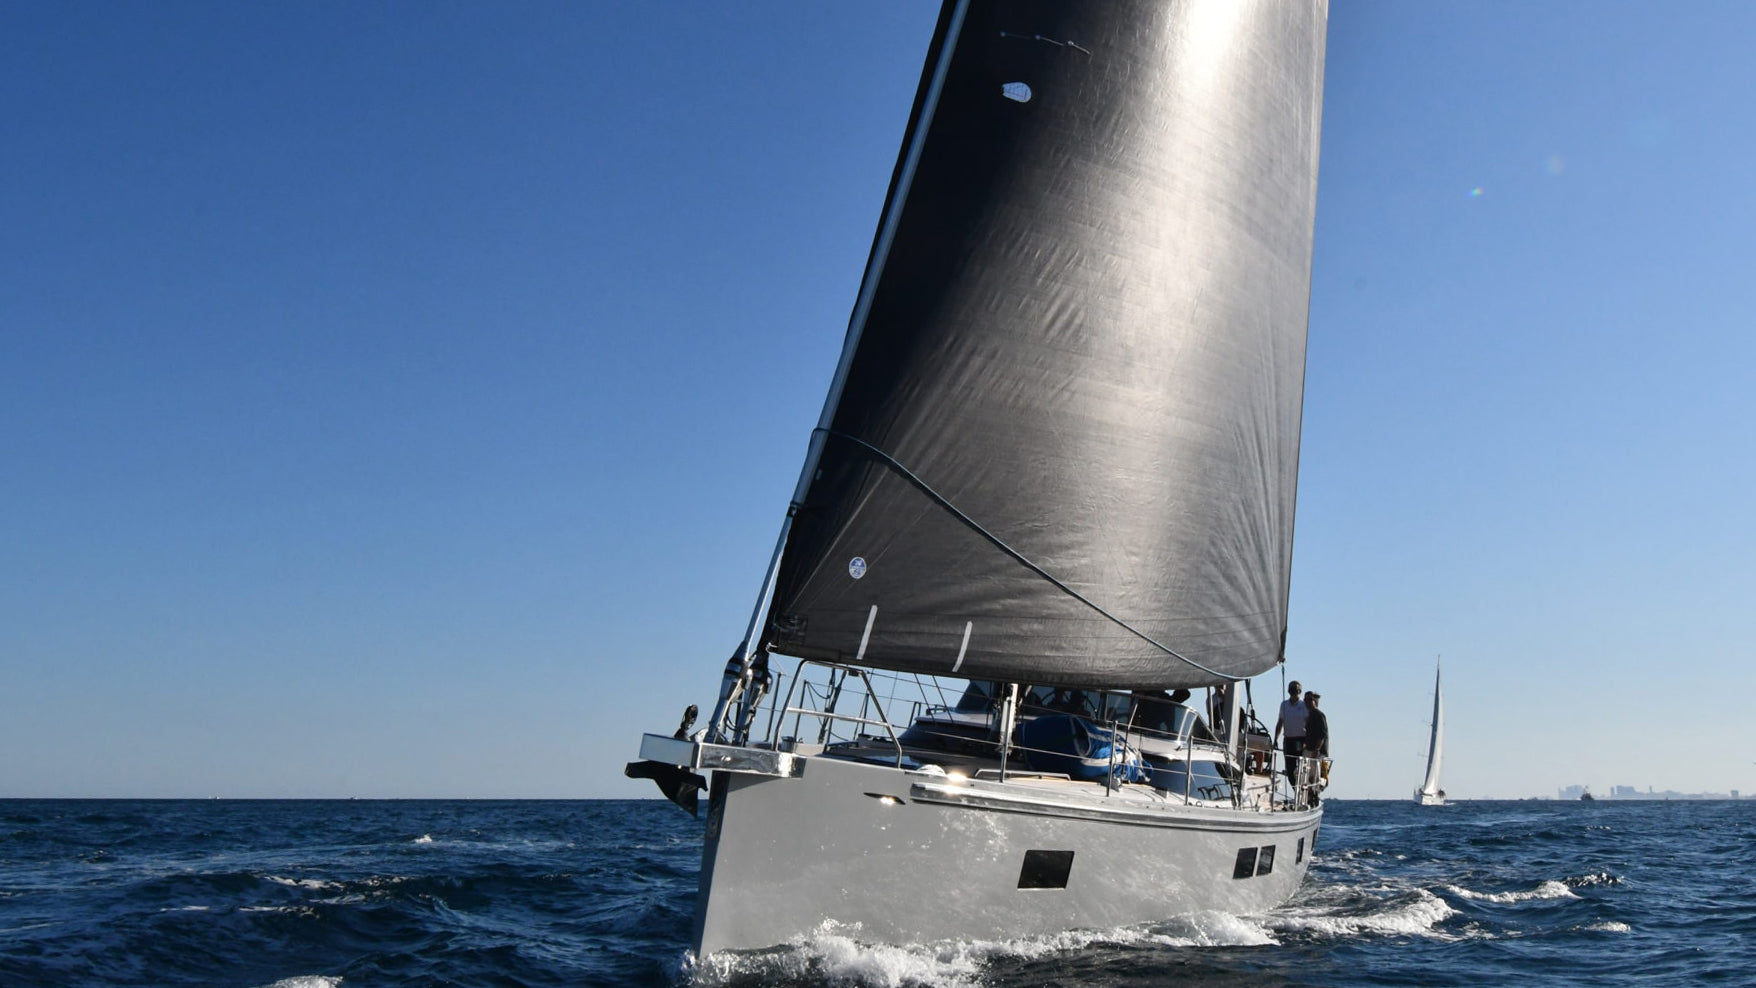 SAIL INVENTORY TIPS FOR HYLAS YACHTS